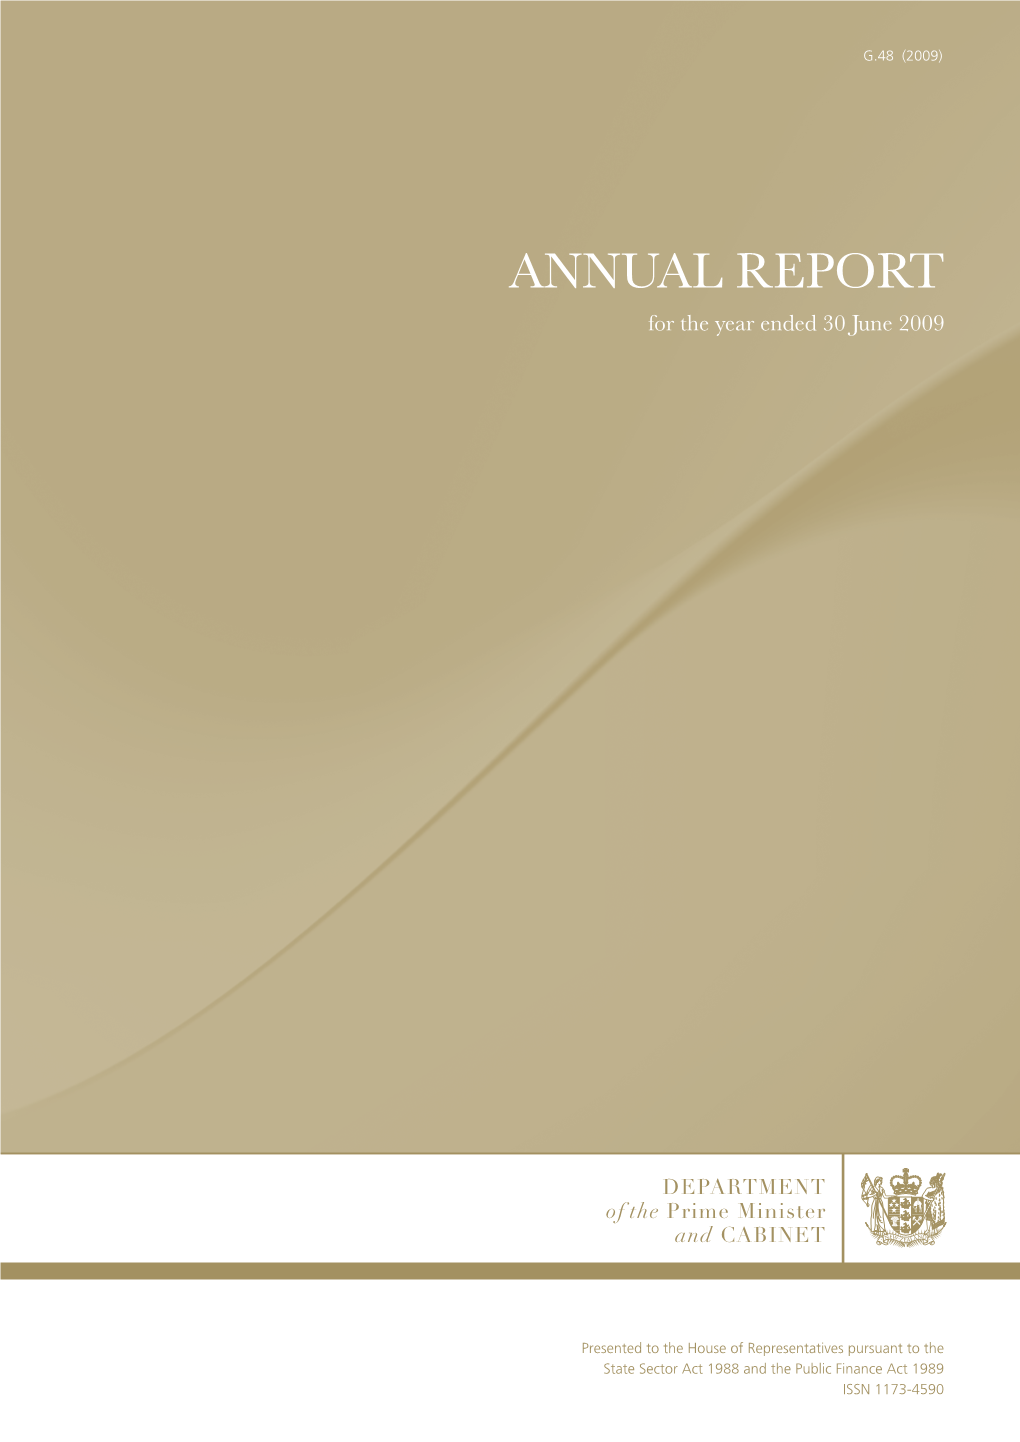 Annual Report: Department of the Prime Minister and Cabinet Annual